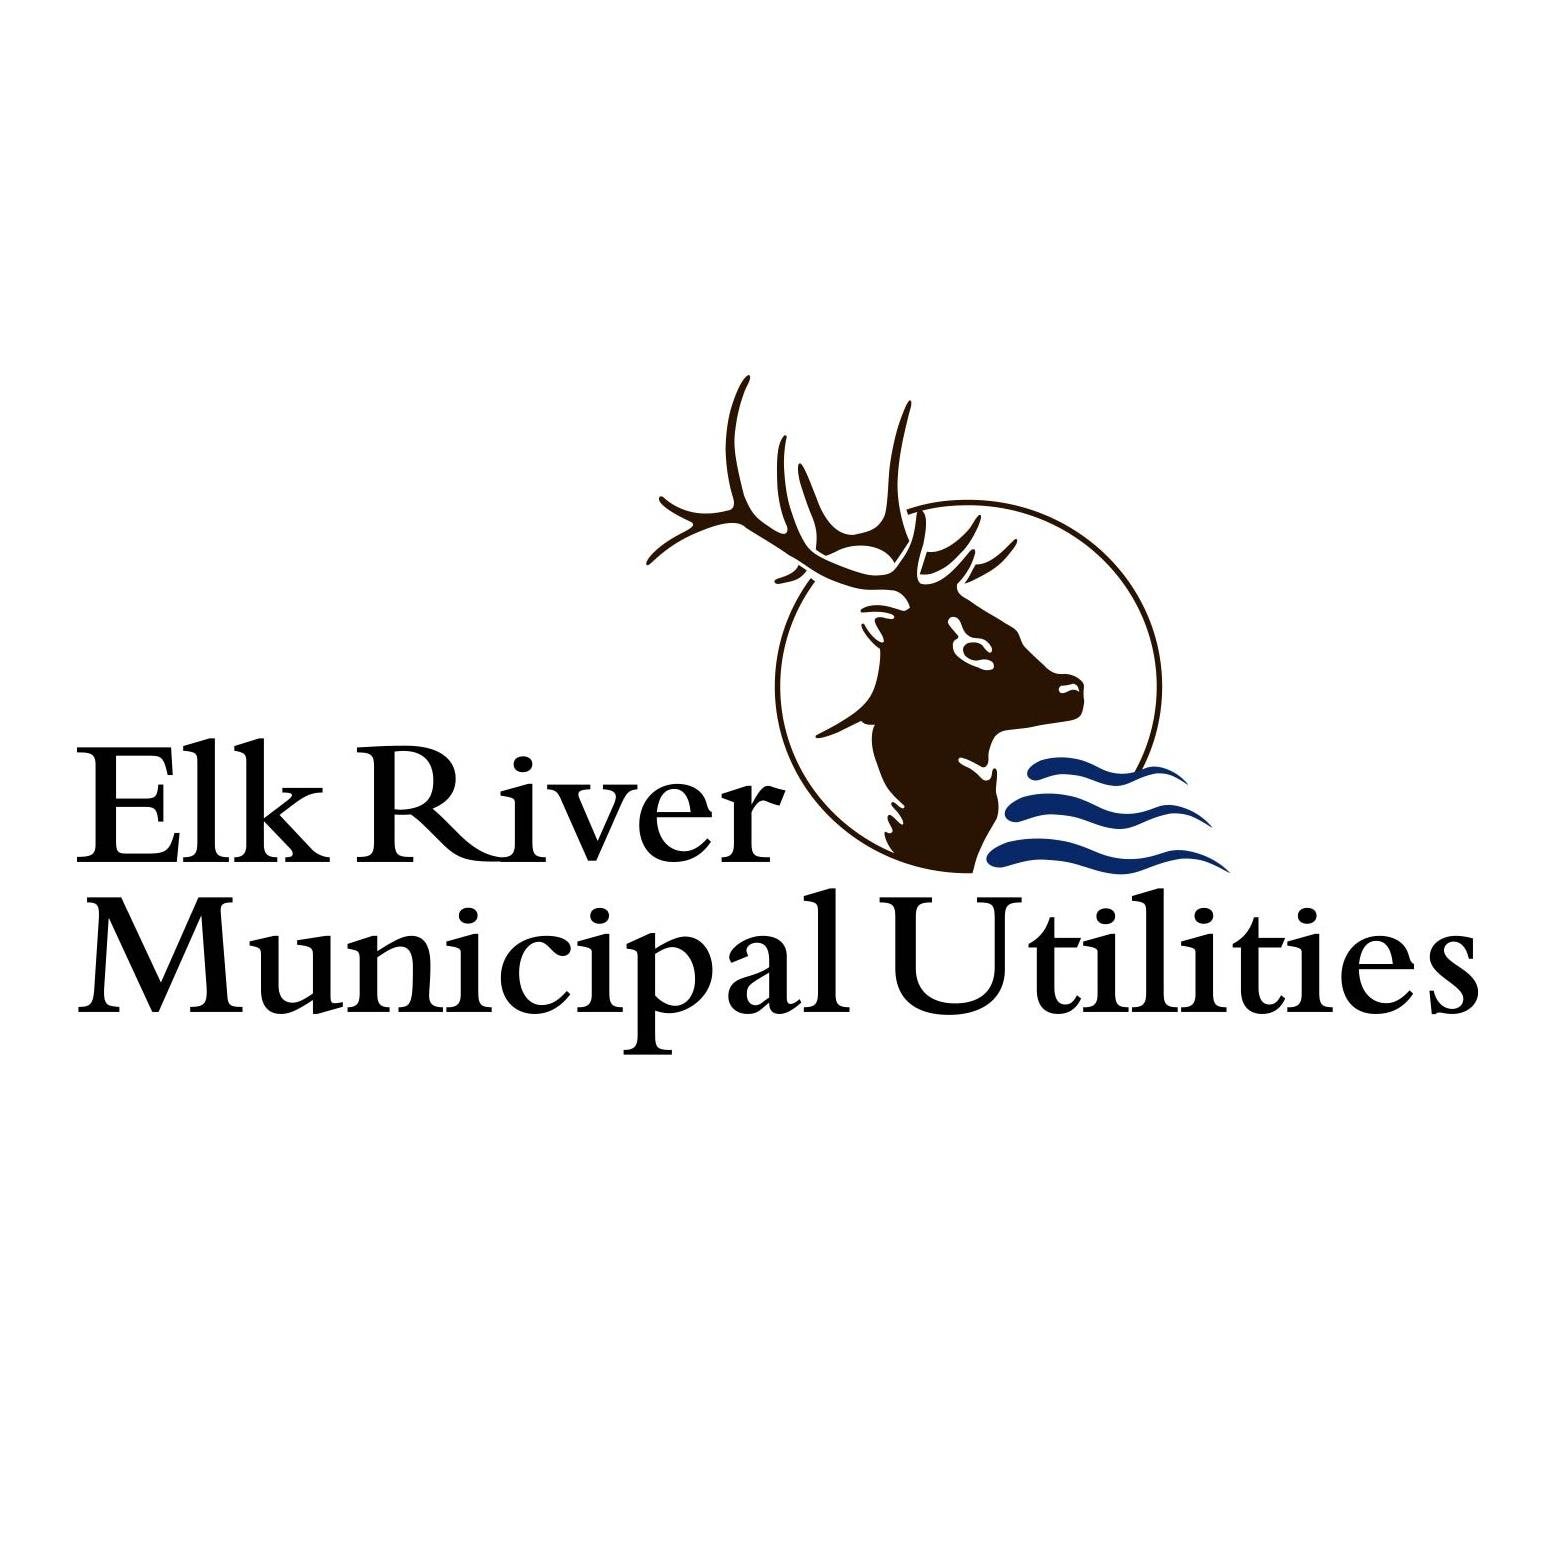 A Minnesota municipal electric and water utility serving areas of Elk River, Otsego, Big Lake Township, and Dayton. Est in 1915. For outages call 763-441-2020.